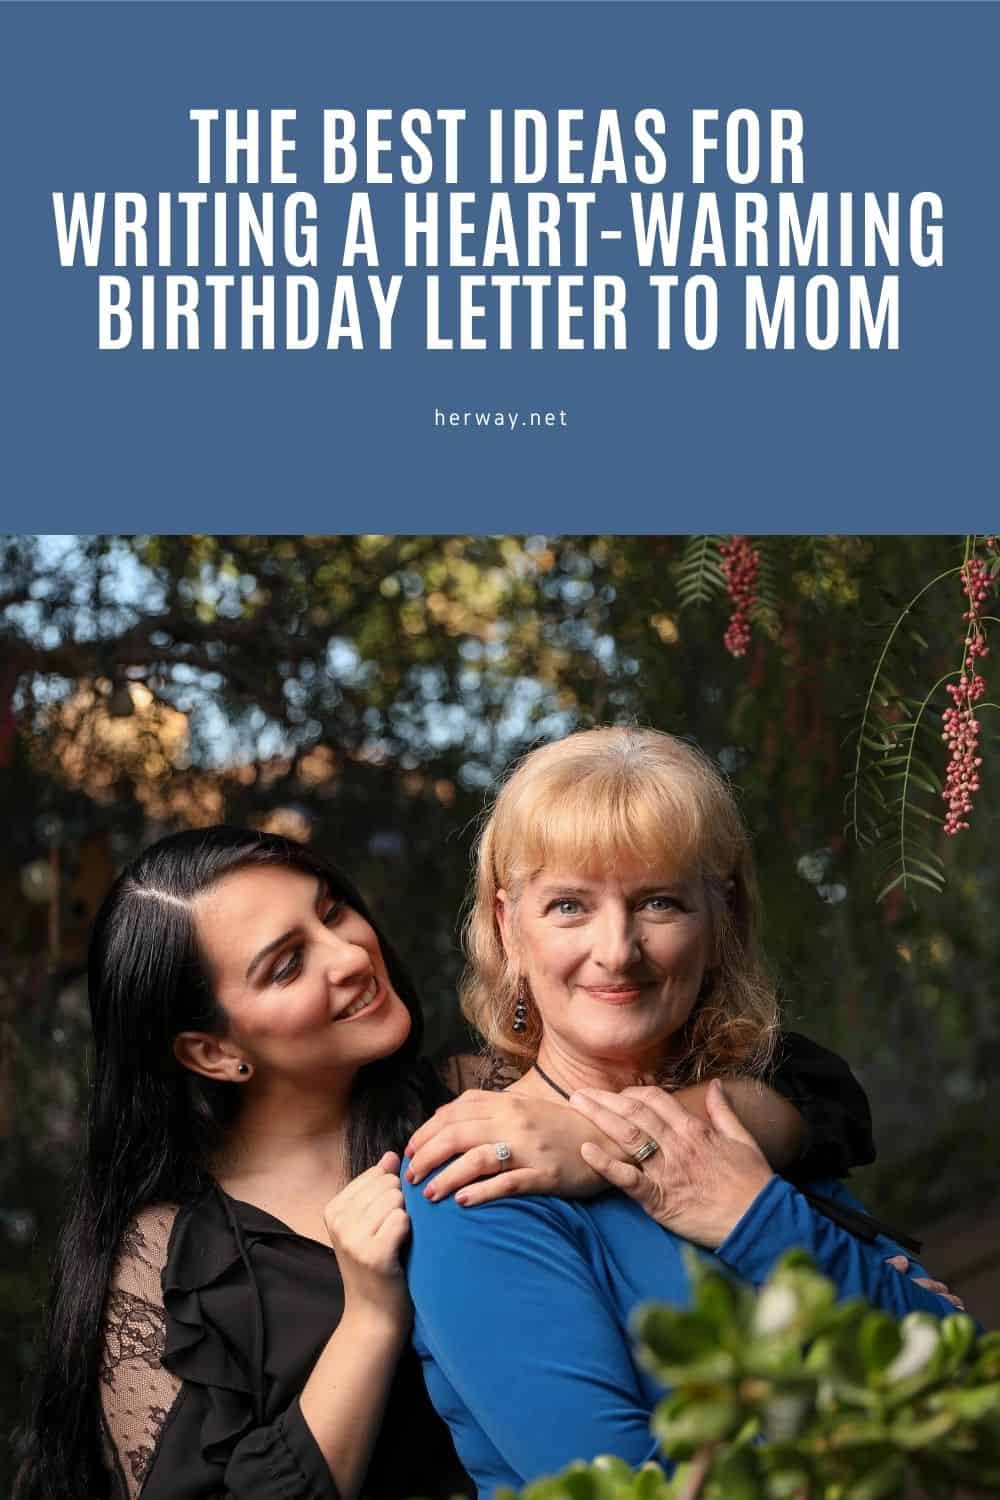 The Best Ideas For Writing A Heart-Warming Birthday Letter To Mom